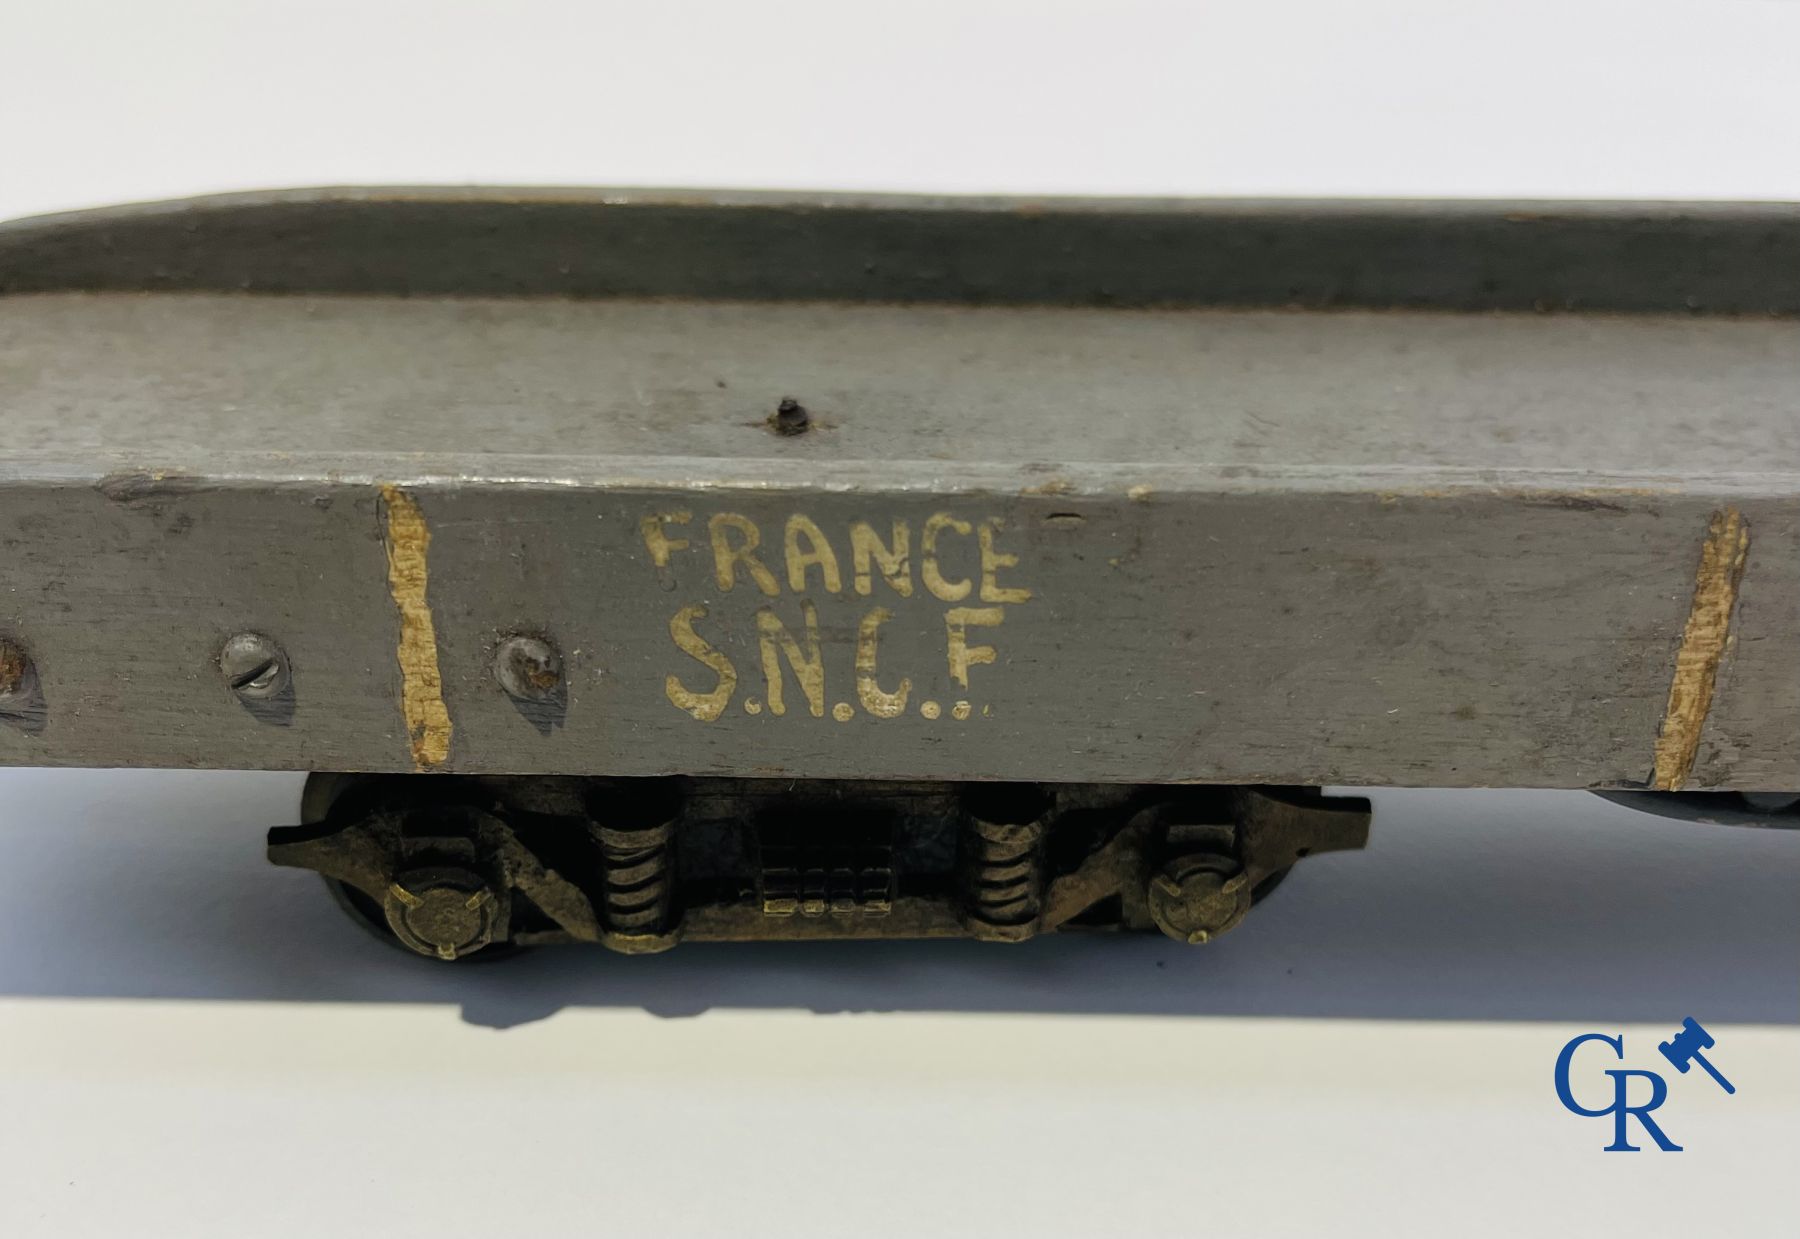 Old toys: Märklin, Locomotive with towing tender and dining car.
About 1930. - Image 24 of 32